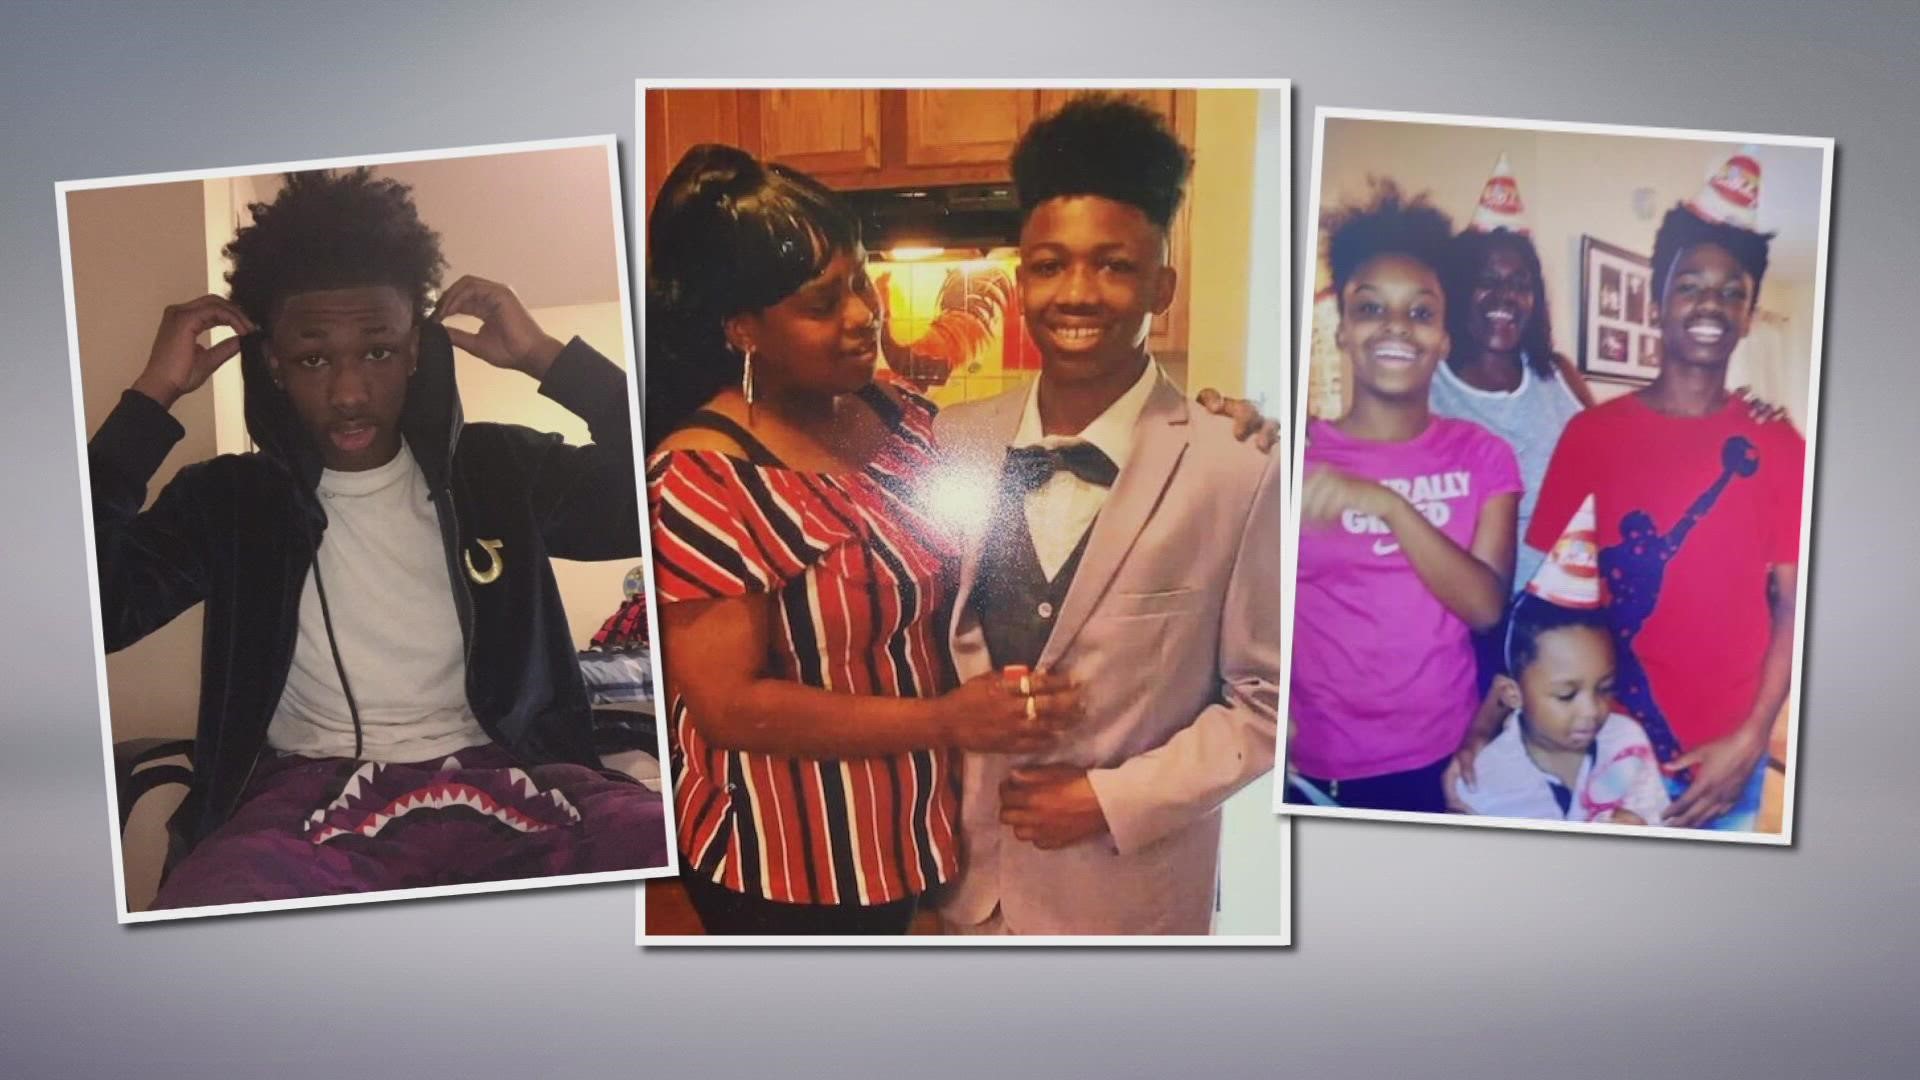 A year ago today 16-year-old Tyree Smith was shot and killed as he waited for the bus to school.
It was a senseless act of violence that shook our community.